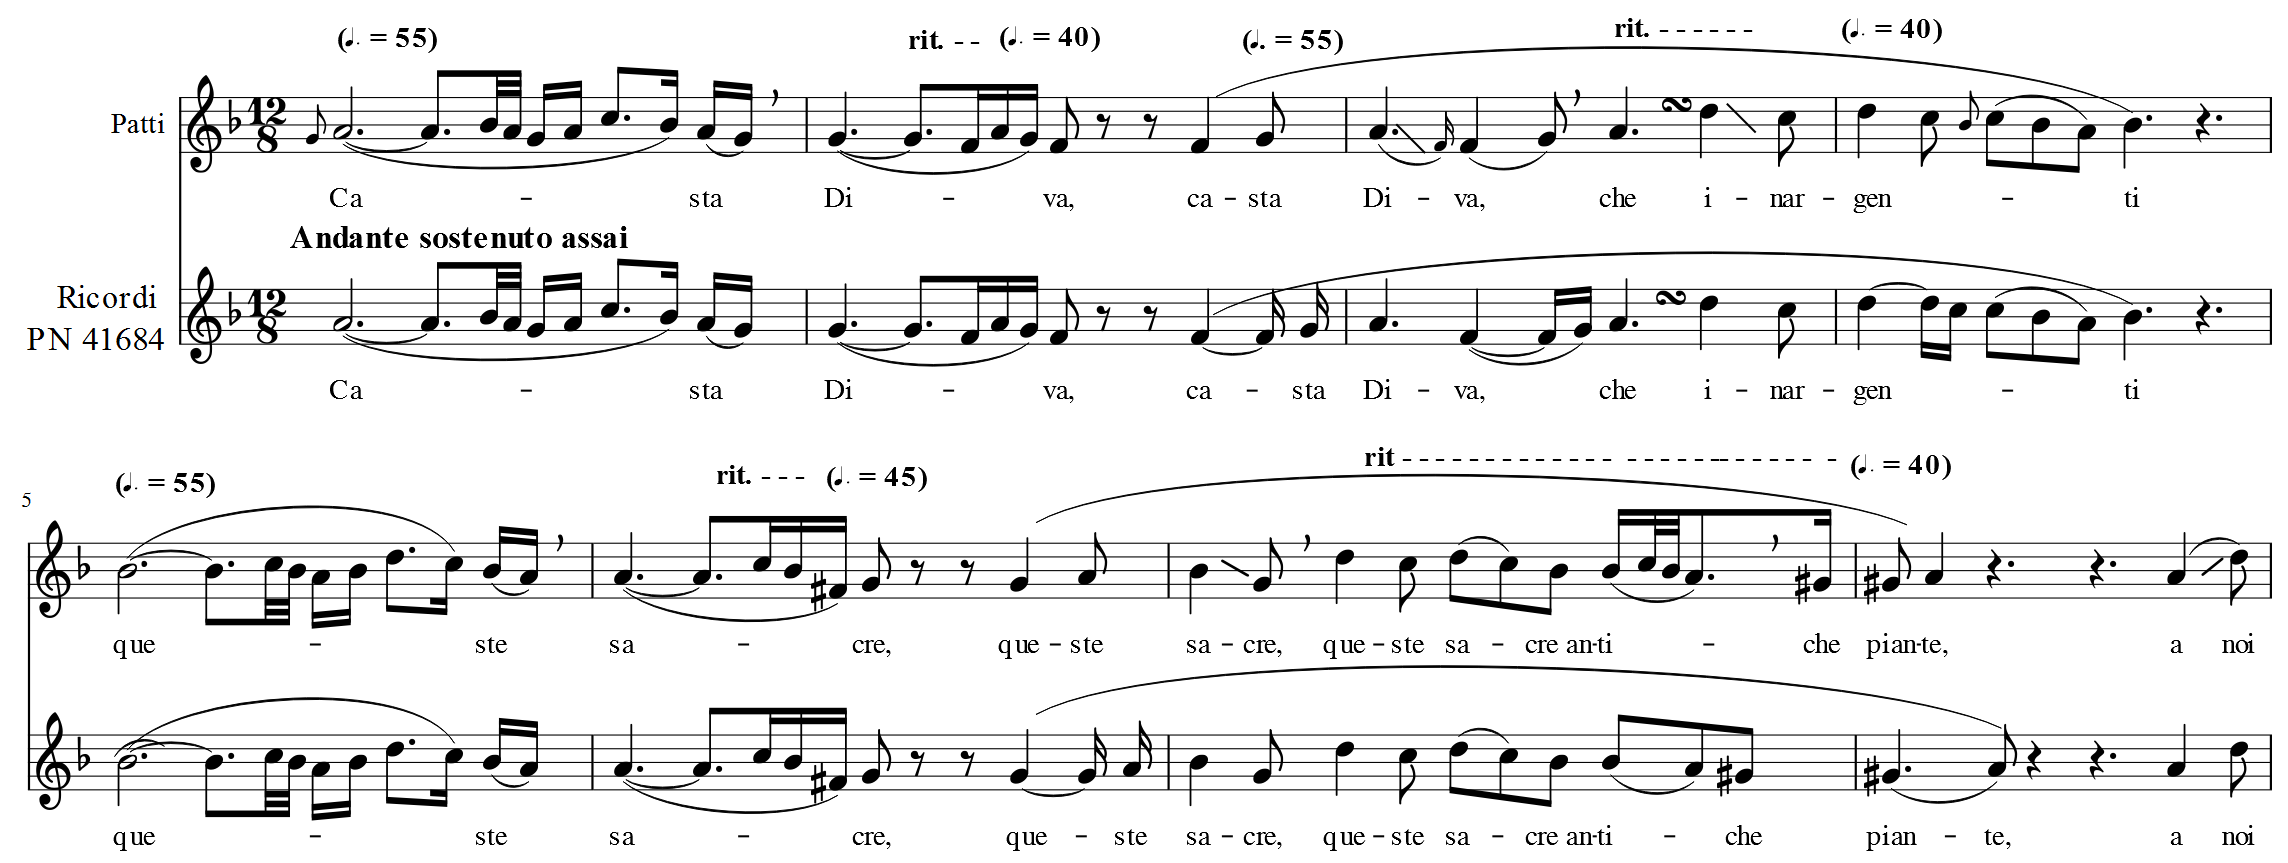 Figure 2 shows bars 1-15 of Patti's Casta Diva with emphasis on phrasing.